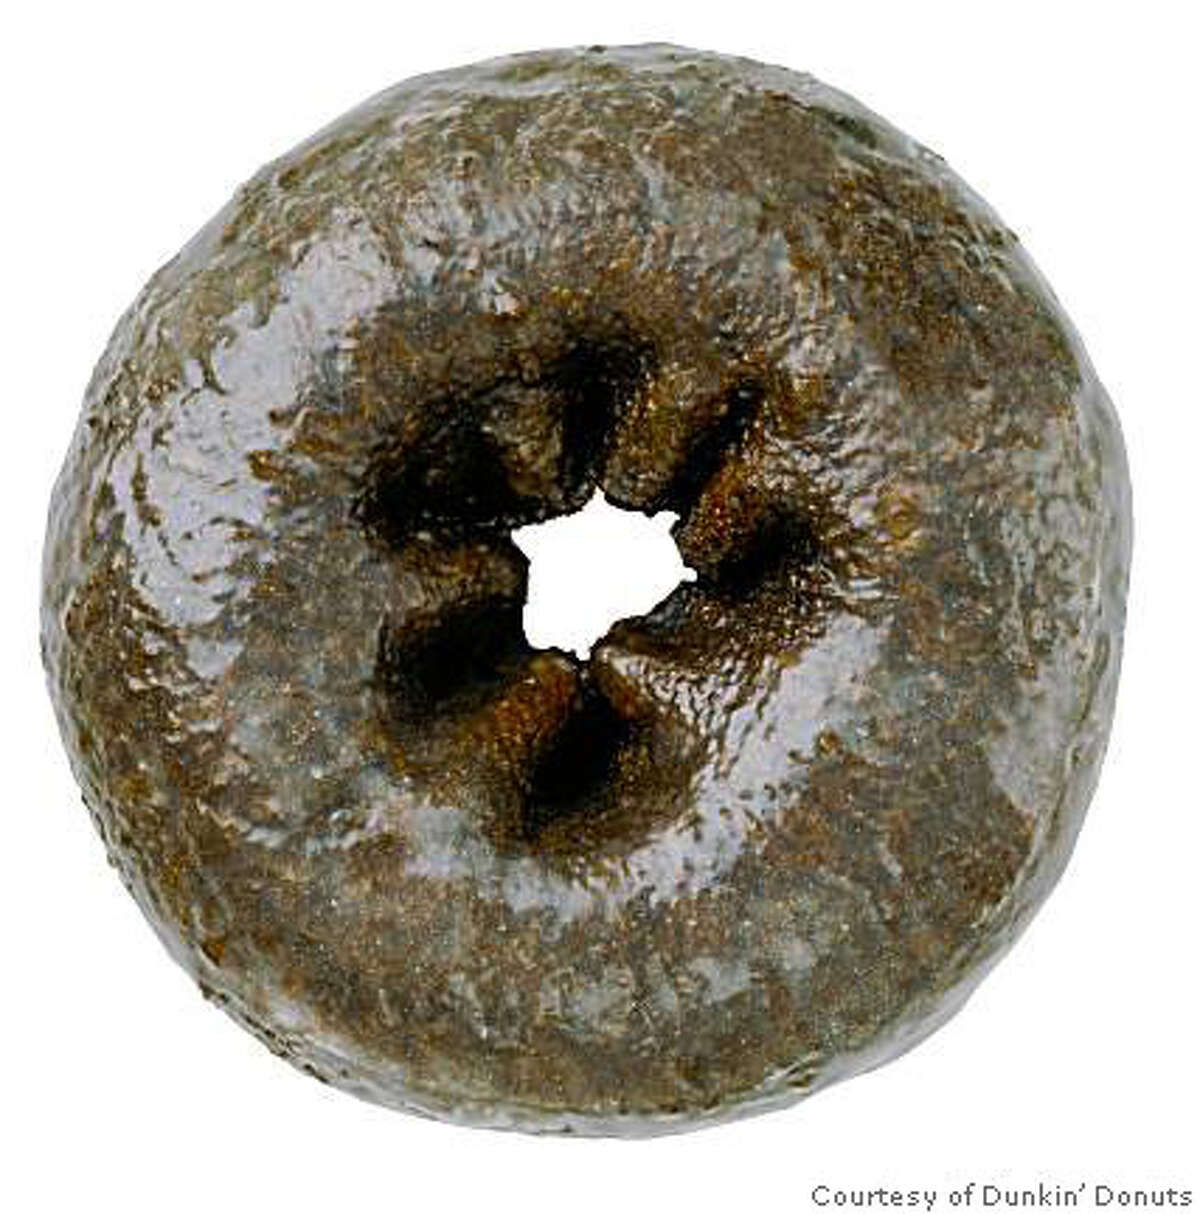 handout image of dunkin donuts' chocolate glazed cake donut. it has 0gm of transfat